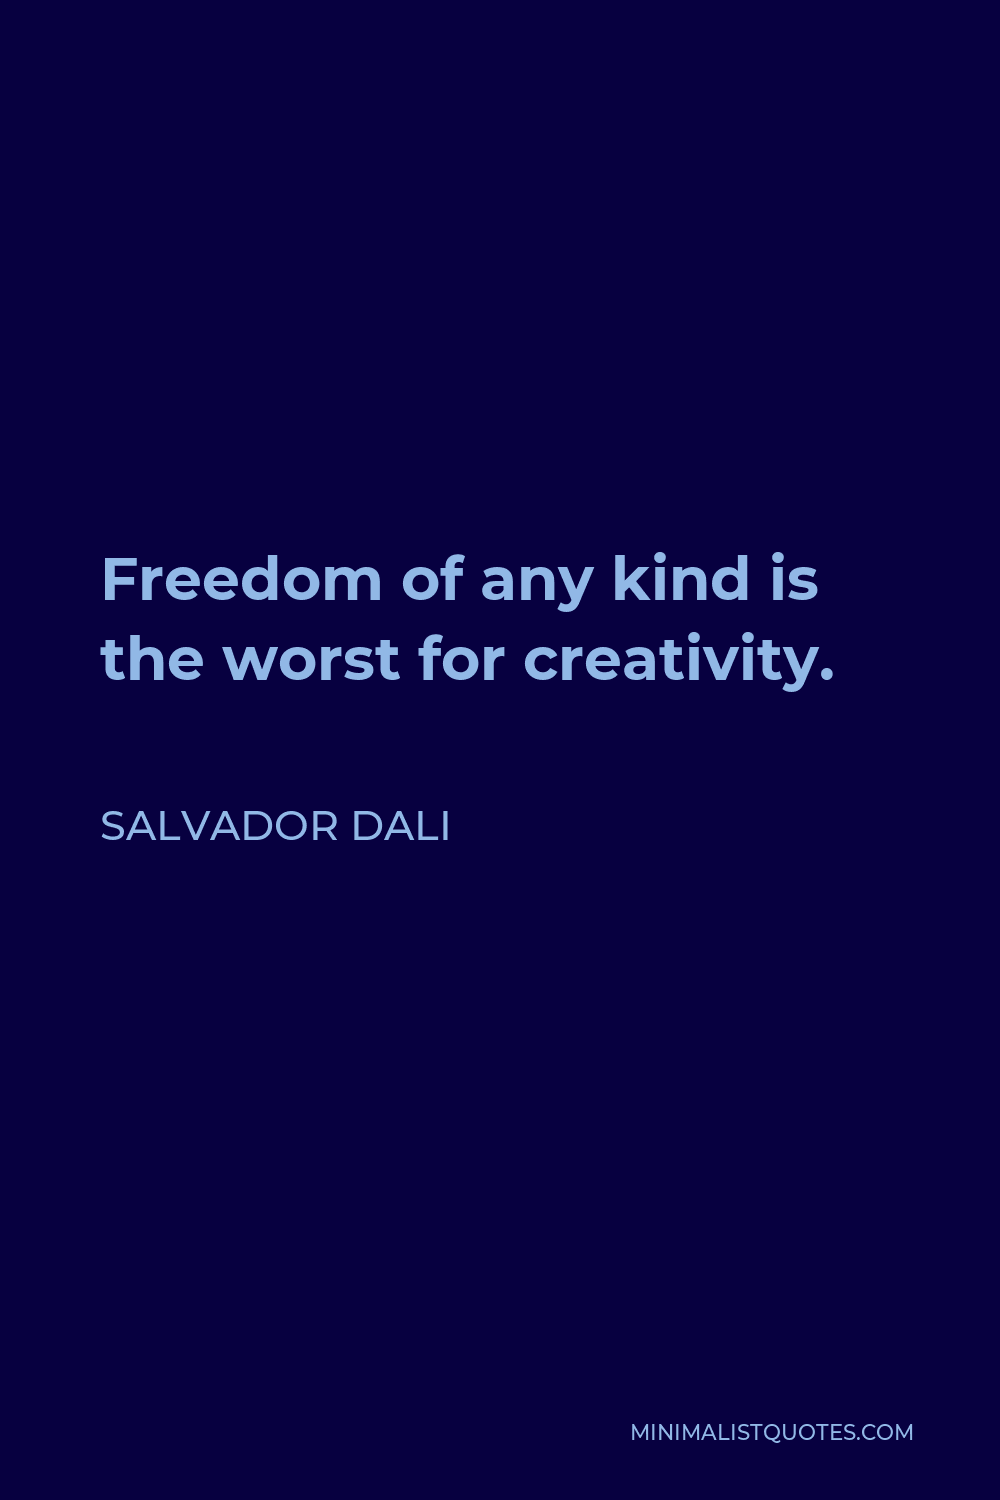 Salvador Dali Quote - Freedom of any kind is the worst for creativity.